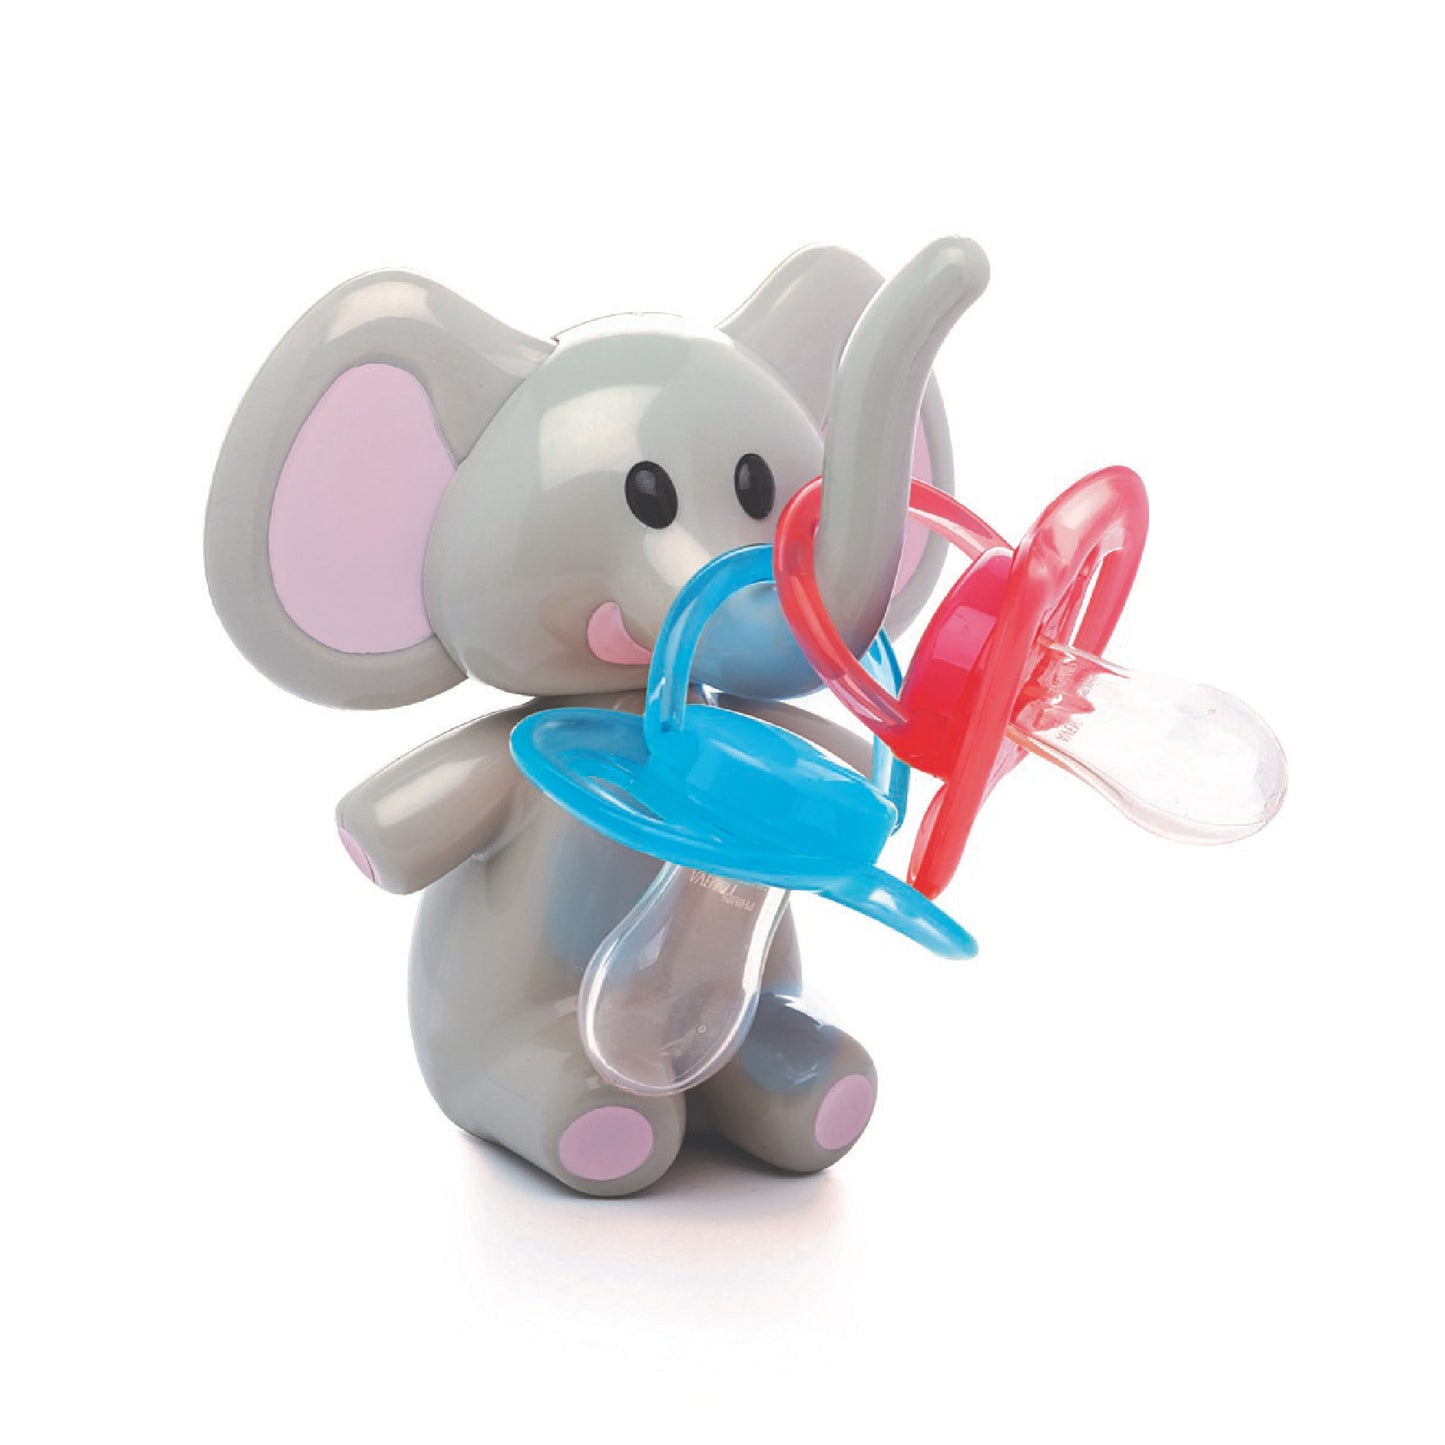 Melii Elephant Pacifier Holder - Adorable and Practical Baby Pacifier Storage with Innovative Suspension System and BPA-Free Safety